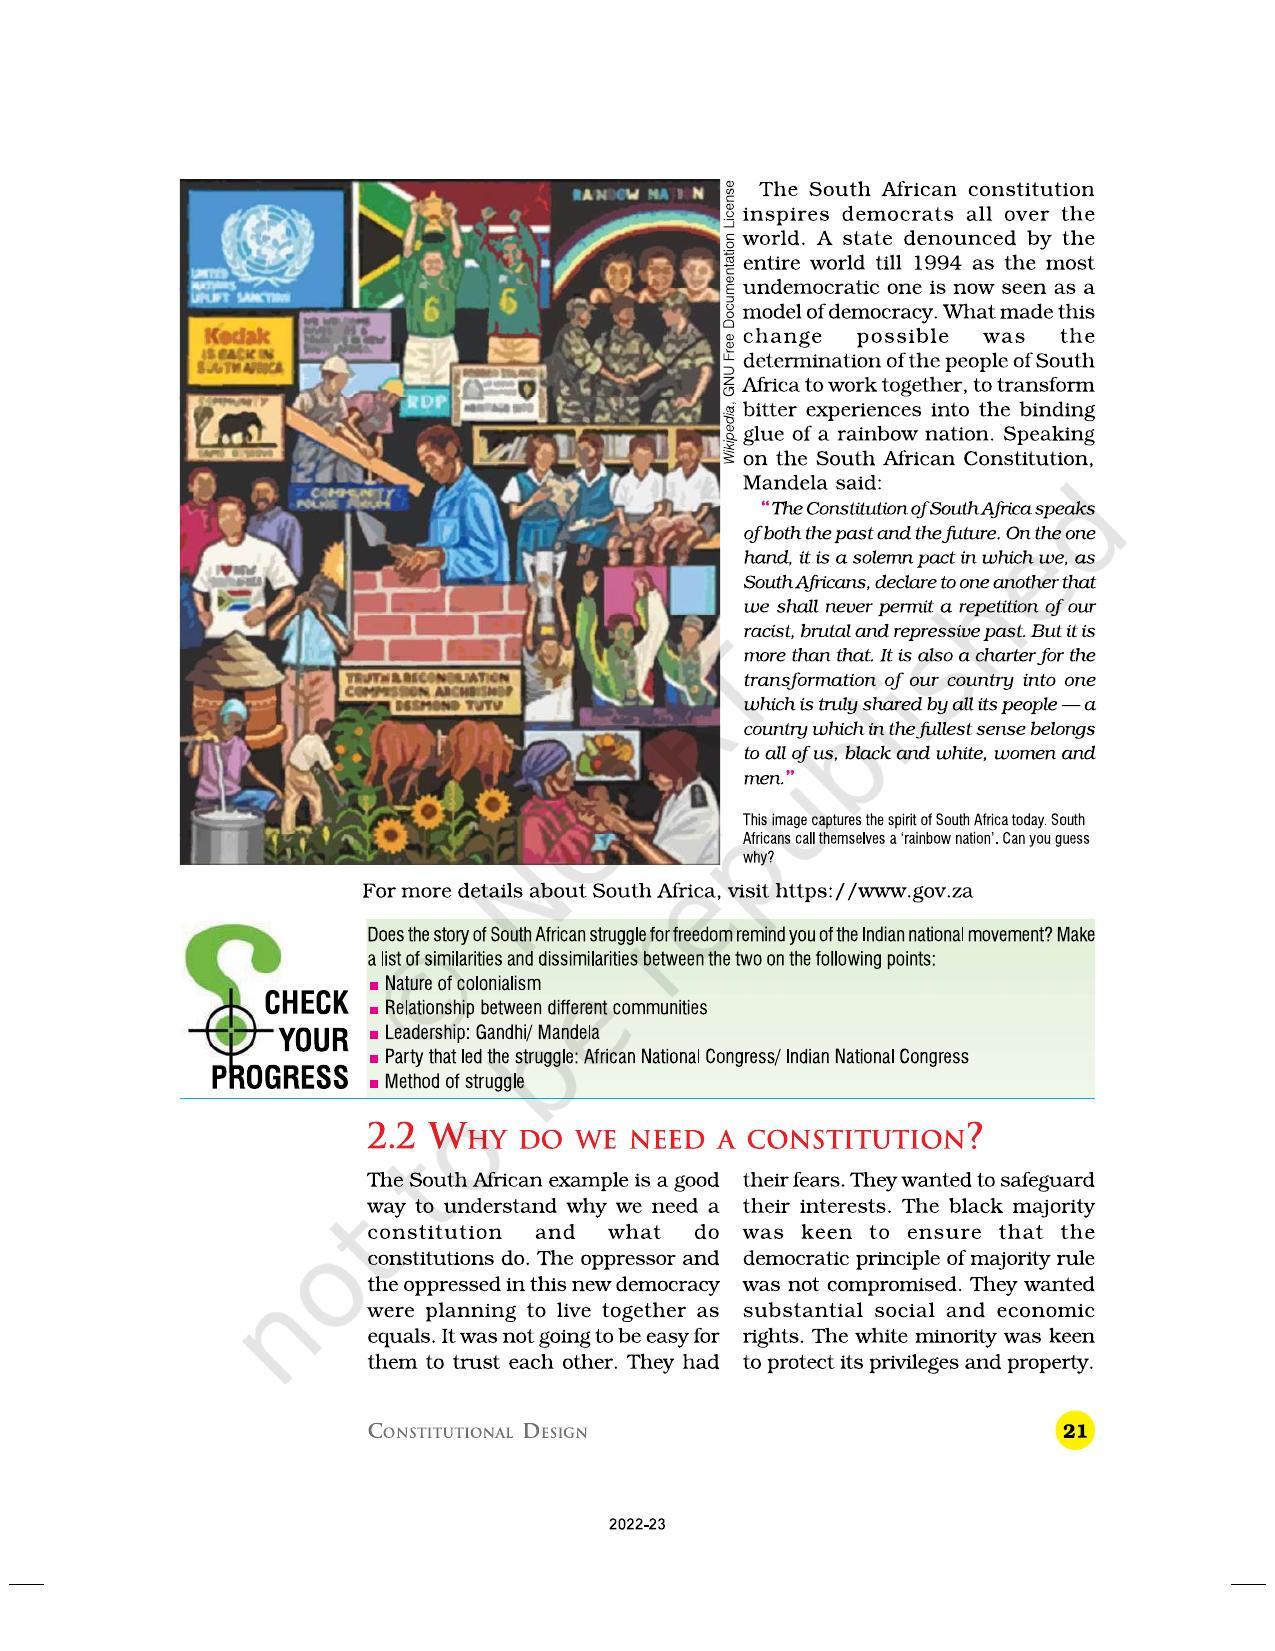 NCERT Book for Class 9 Civics Chapter 3 Constitutional Design - Page 4